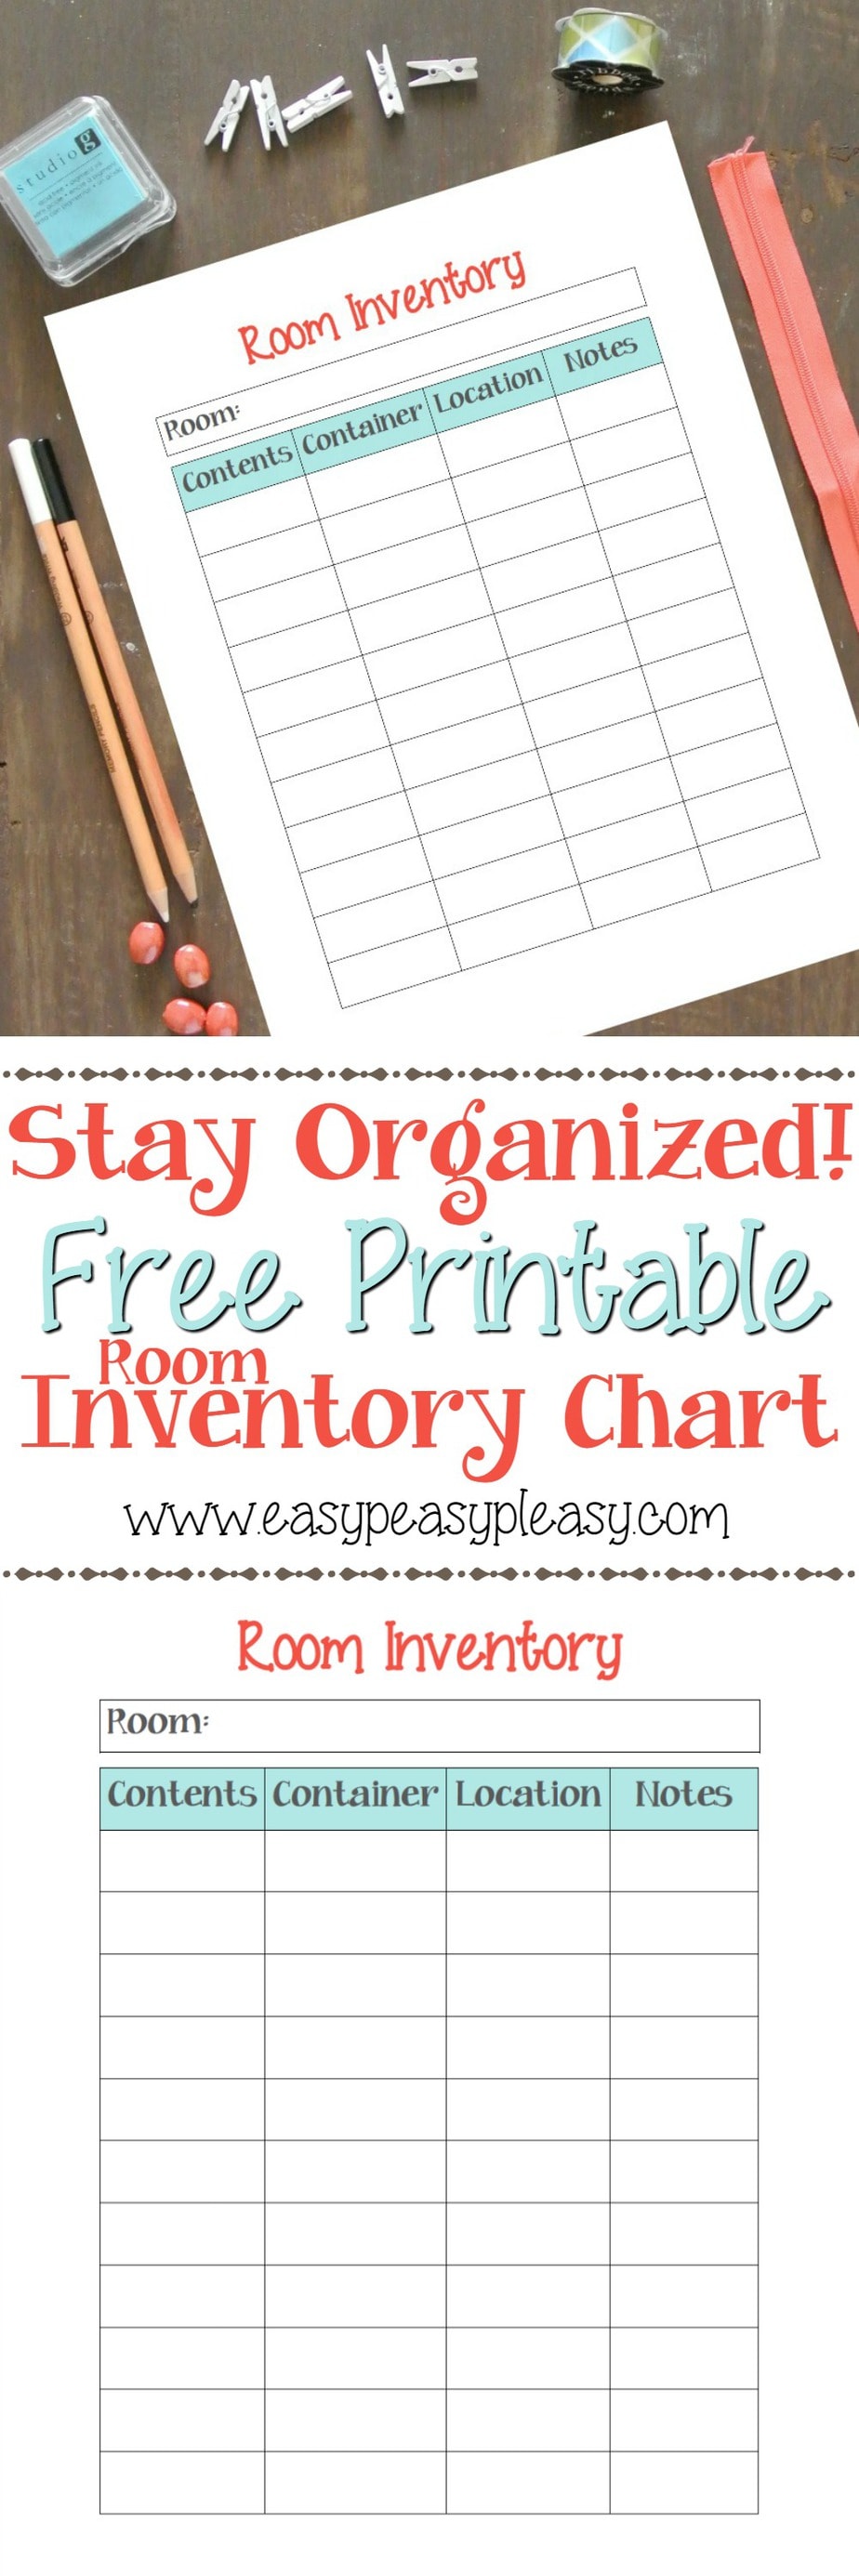 Never search for an item you stored in a container or drawer again! Use this free printable Room Inventory Chart to help you stay organized!